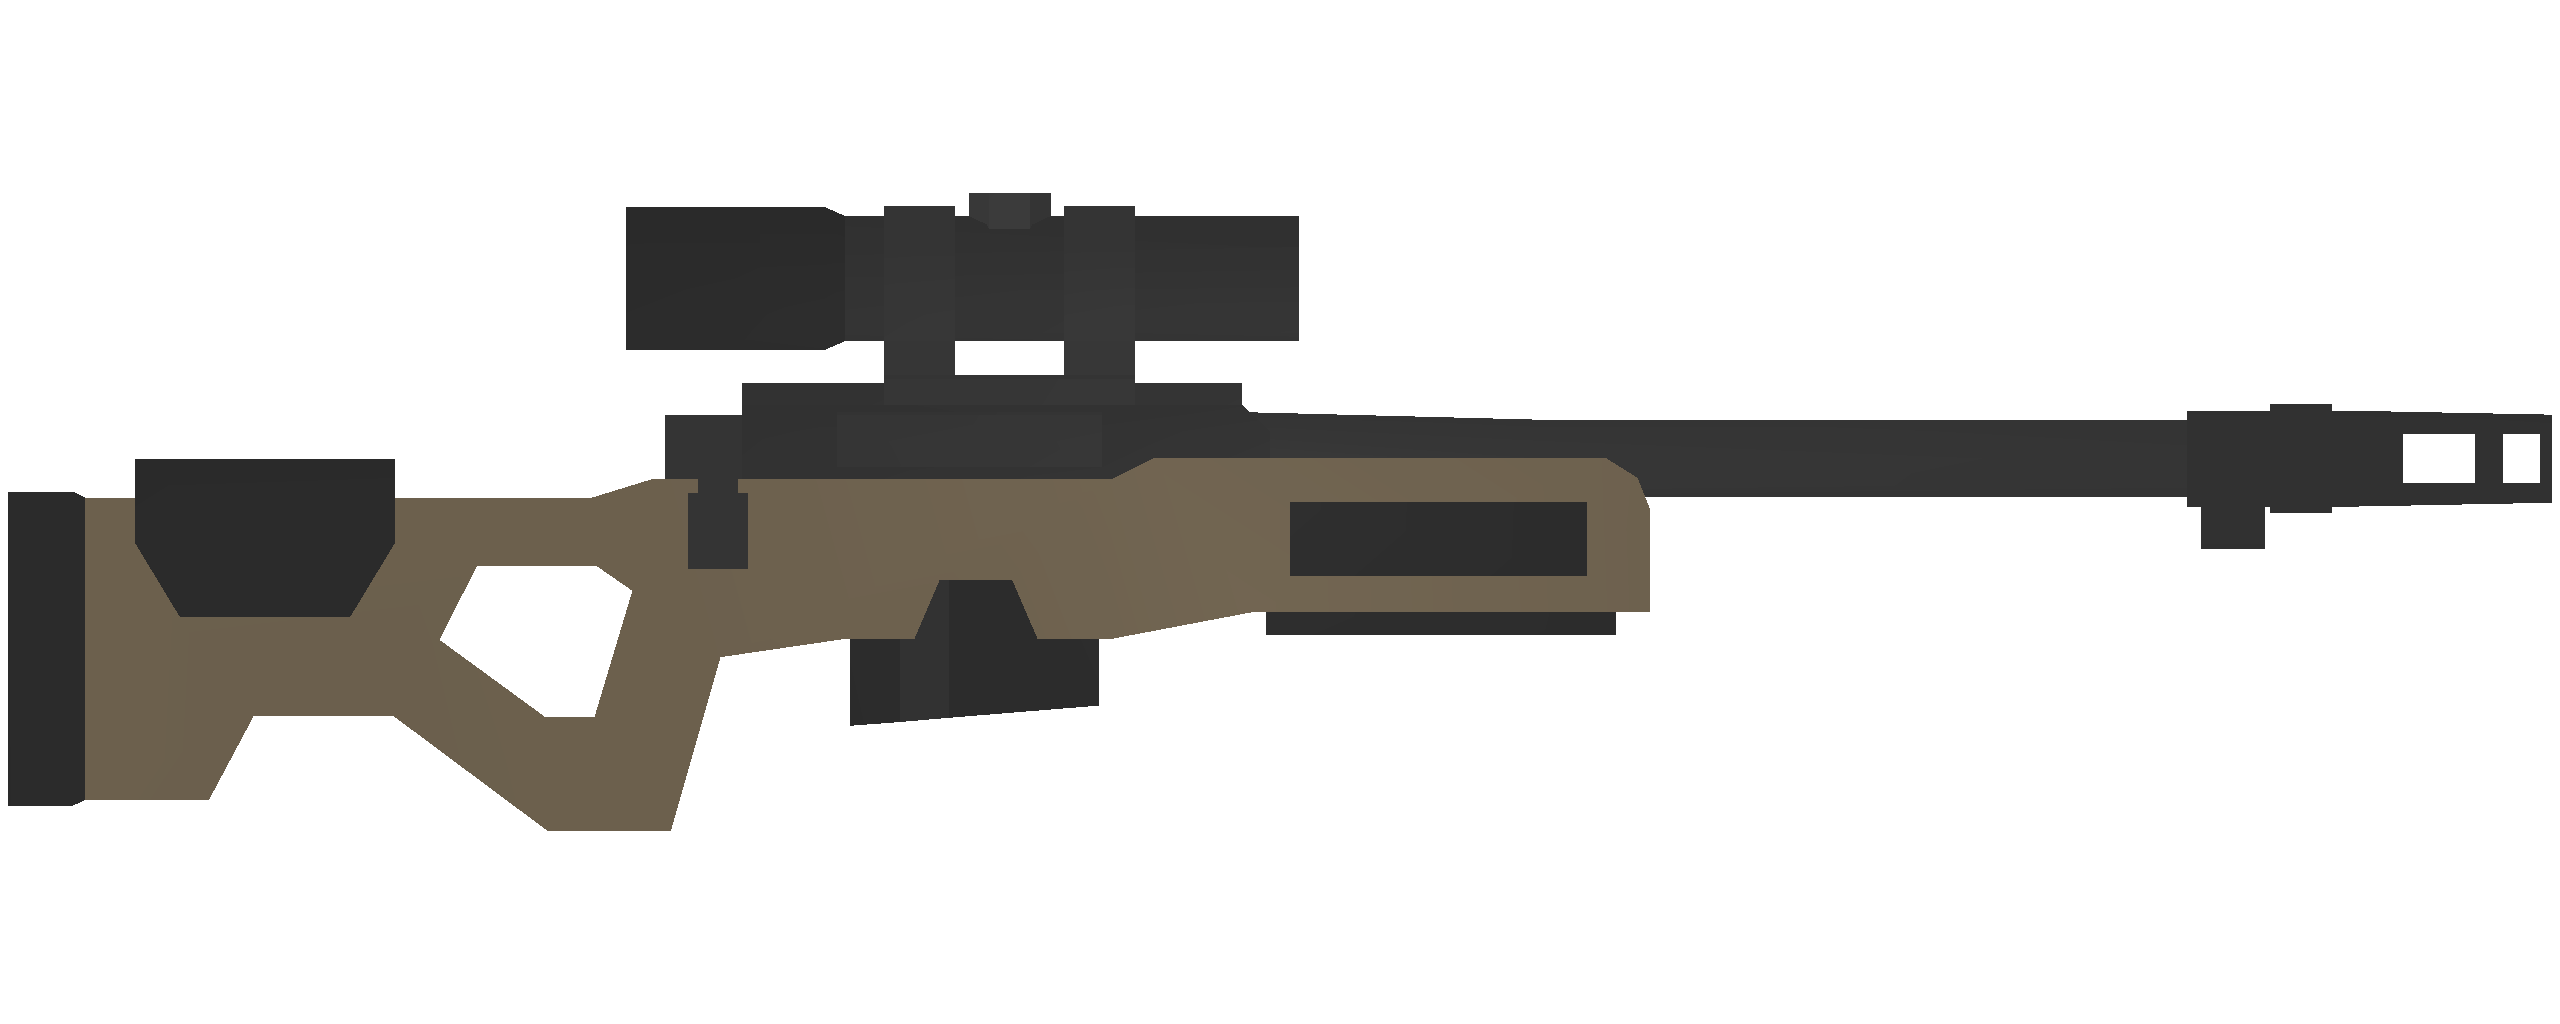 Unturned - Kuwait Items Redux + ID List for Magazines and Attachments - Sniper Rifles - 682CEEA